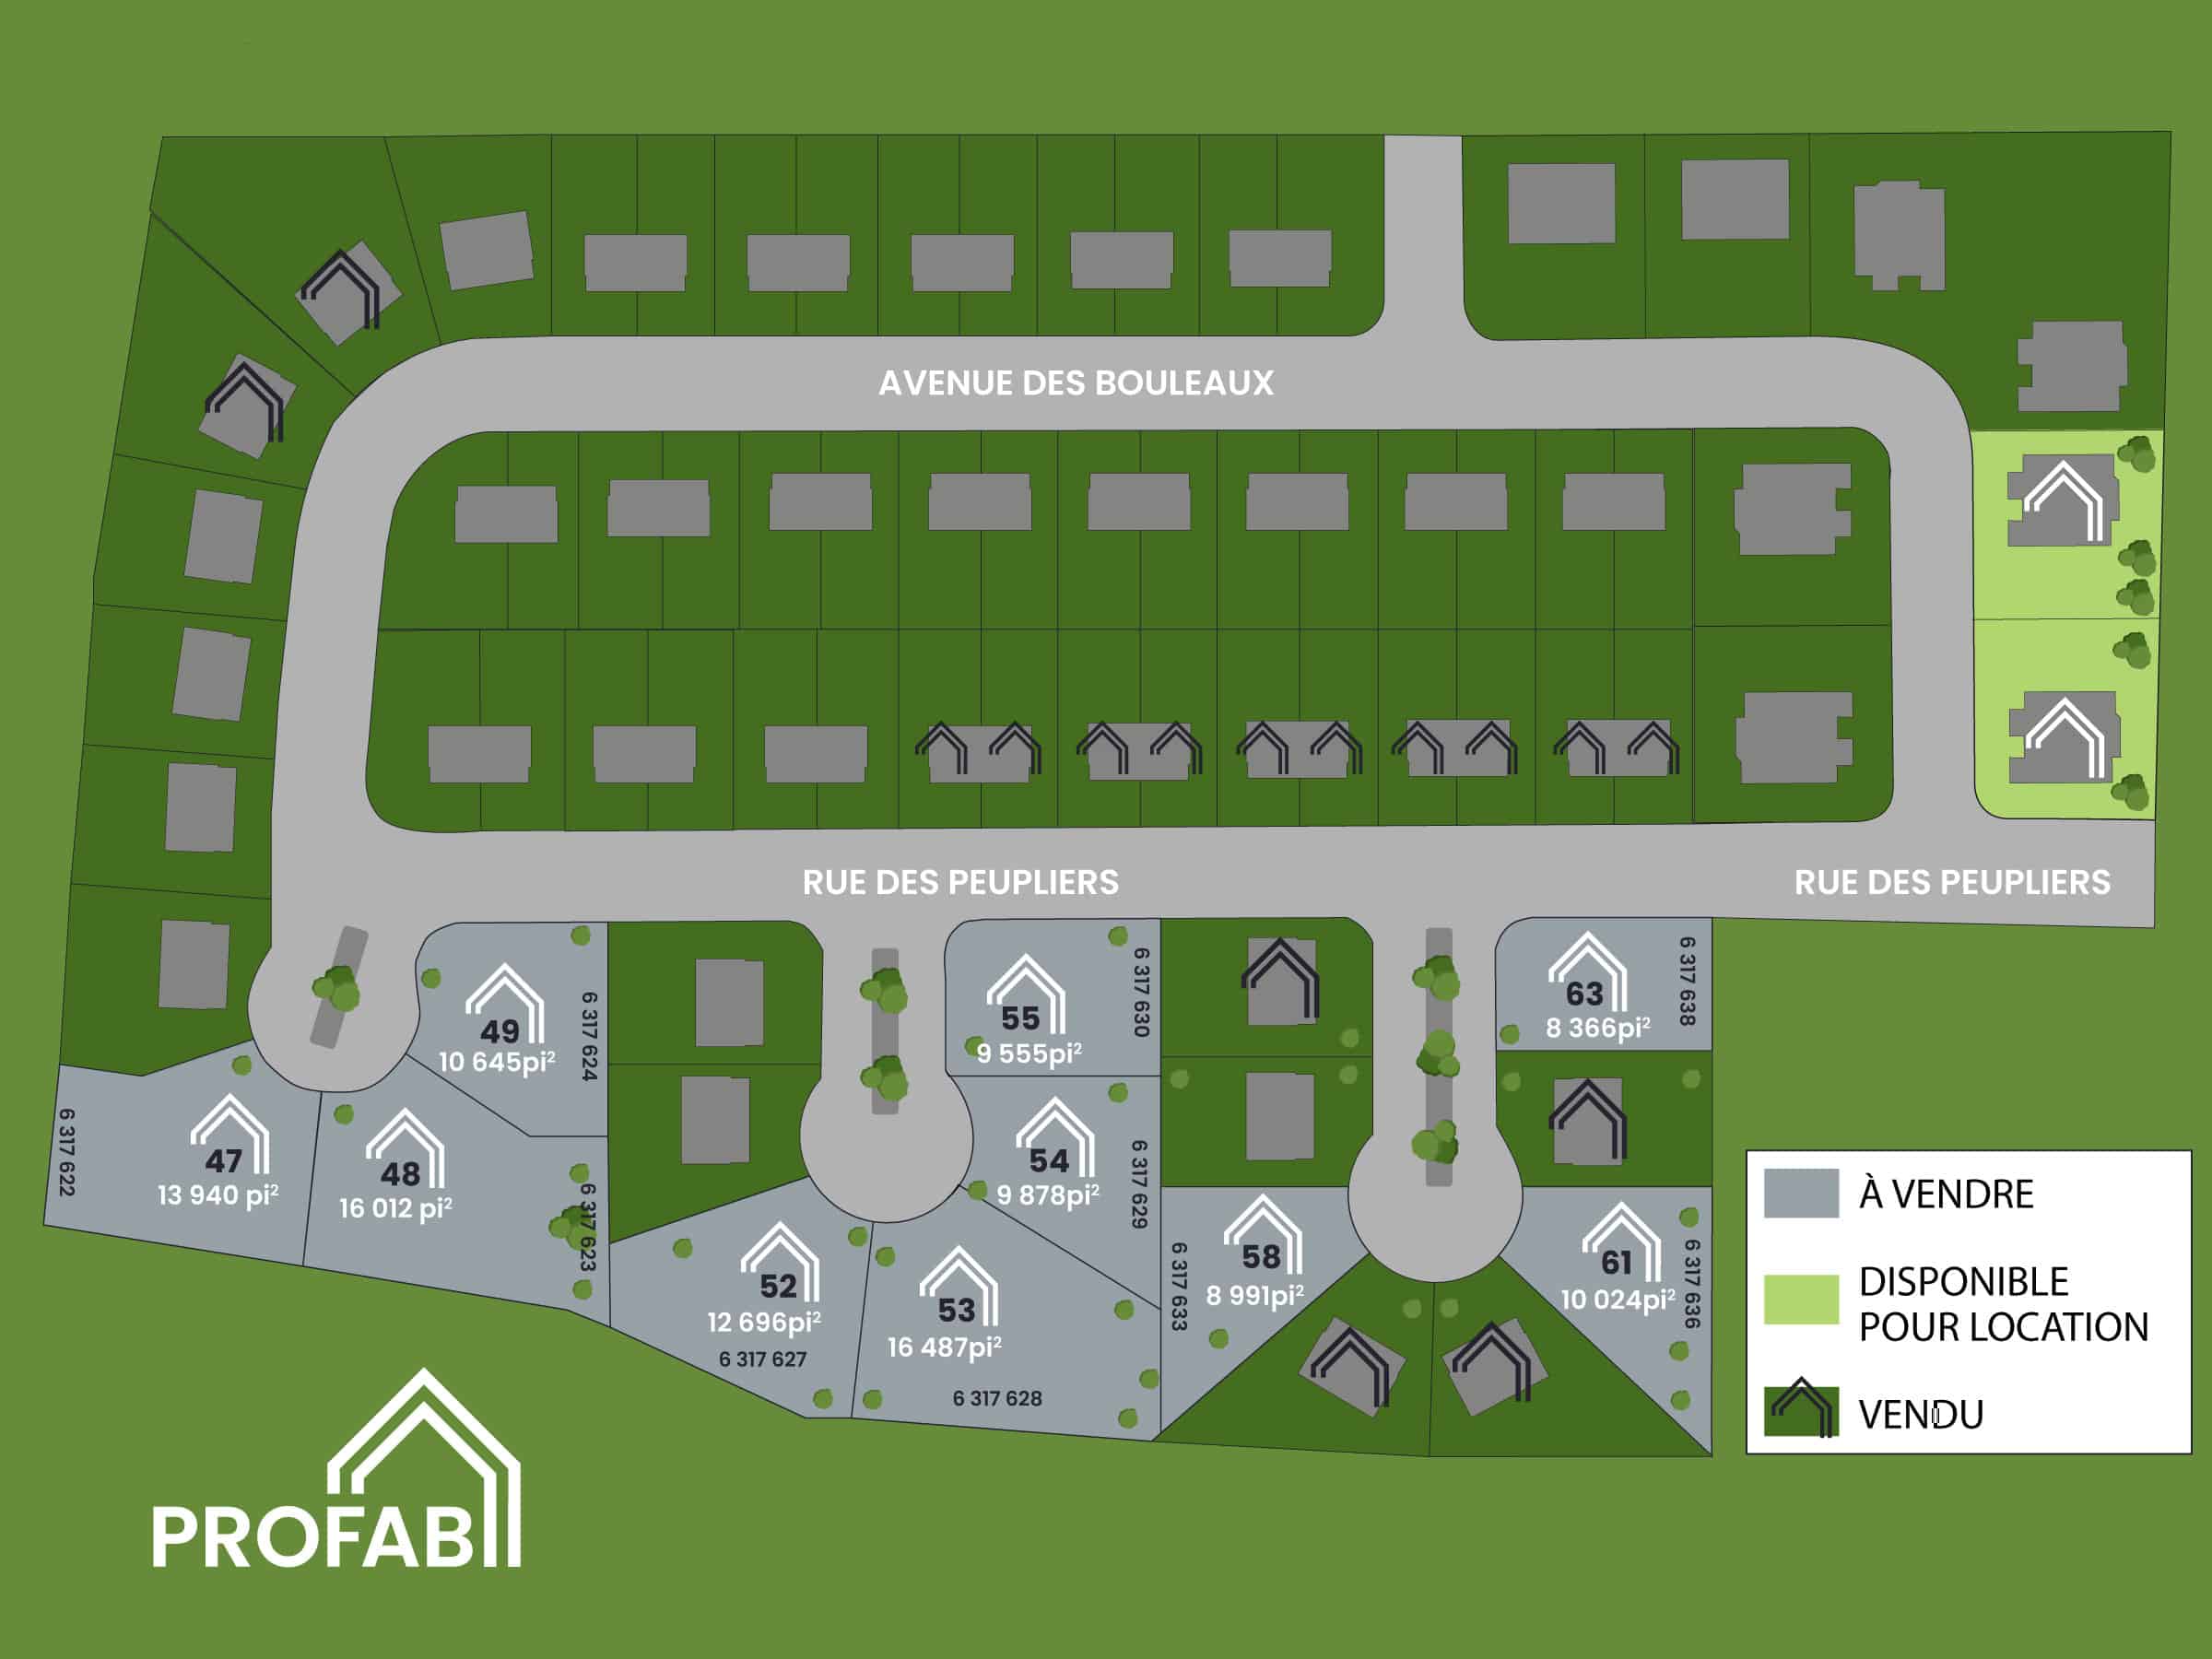 Vallée jonction 2D subdivision plan. Vacant lot number 61 for sale.